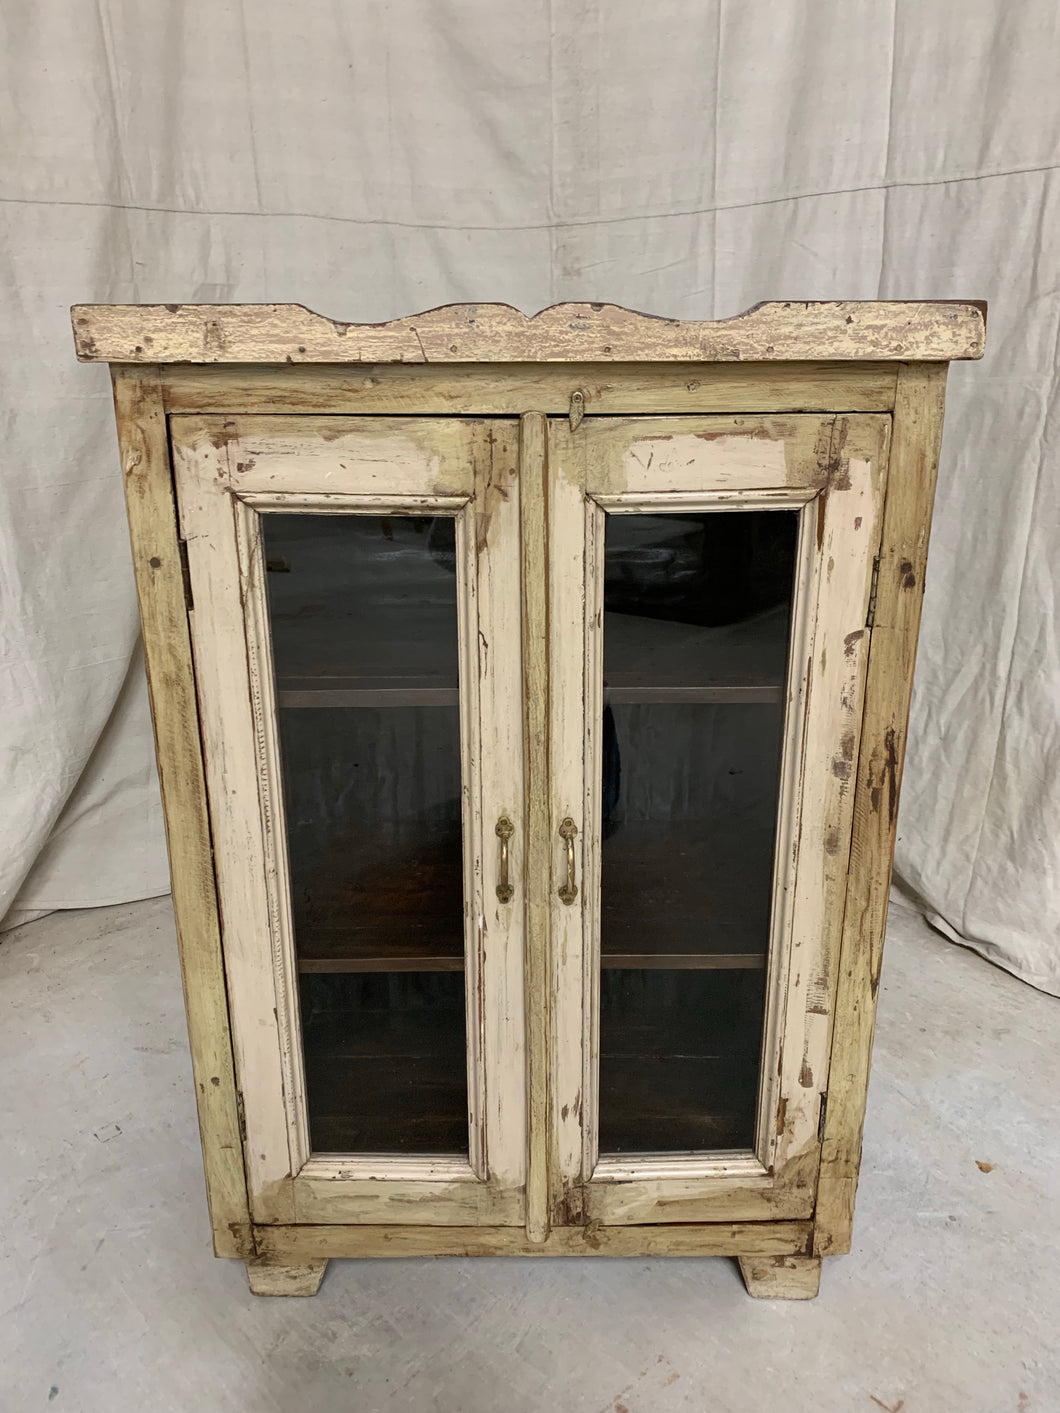 Glass Display Cabinet with Metal Sides and Back